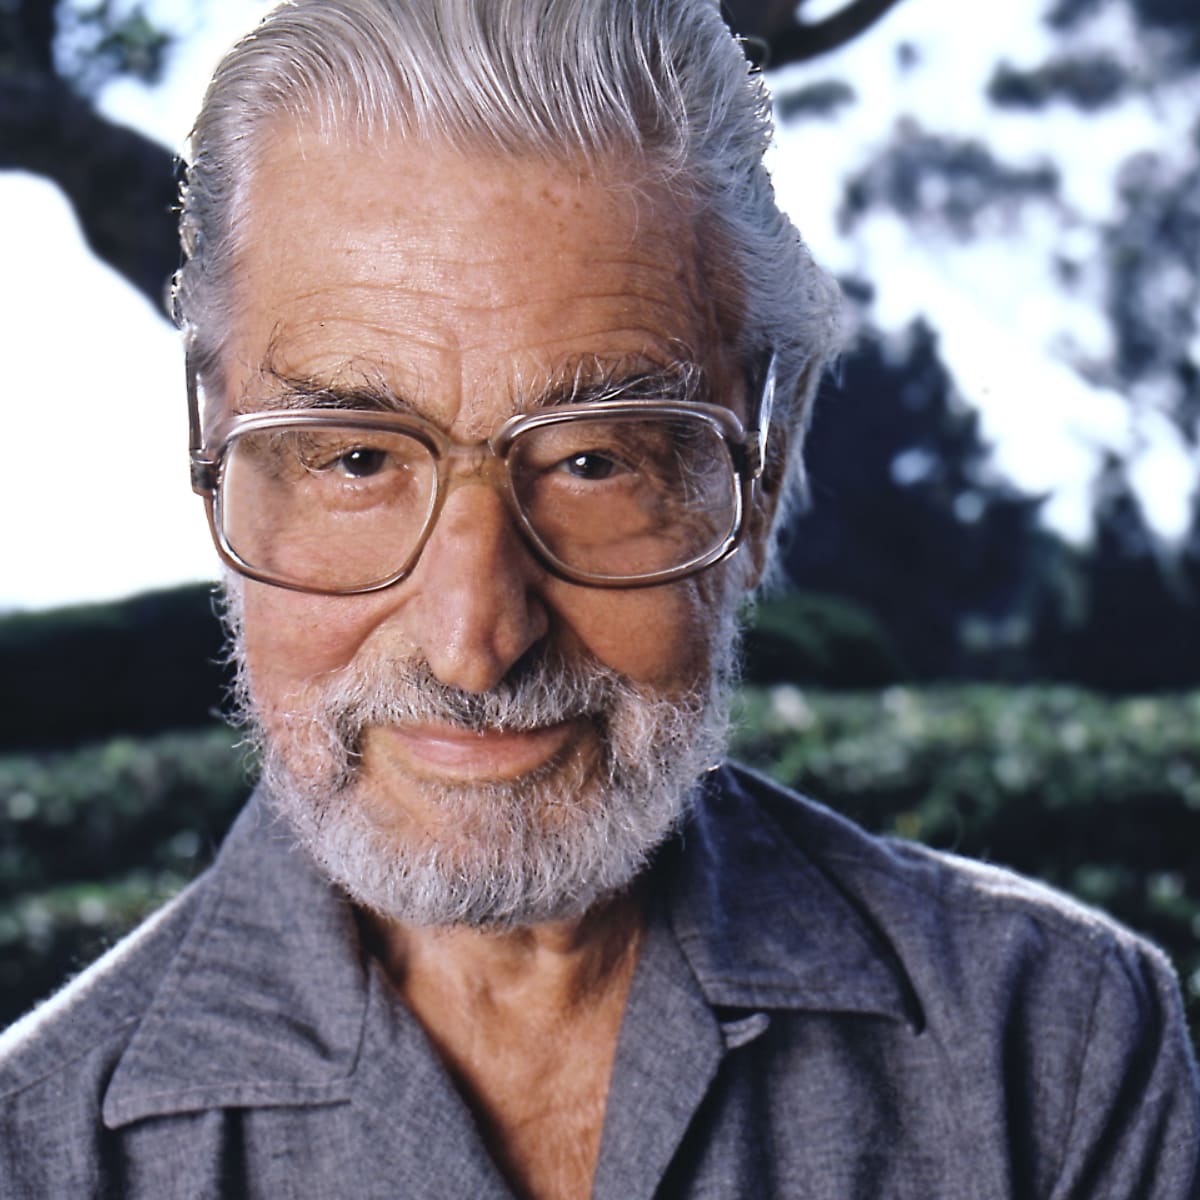 One of the winners of the Pulitzer Prize in 1984, Dr. Seuss Theodor Seuss Geisel